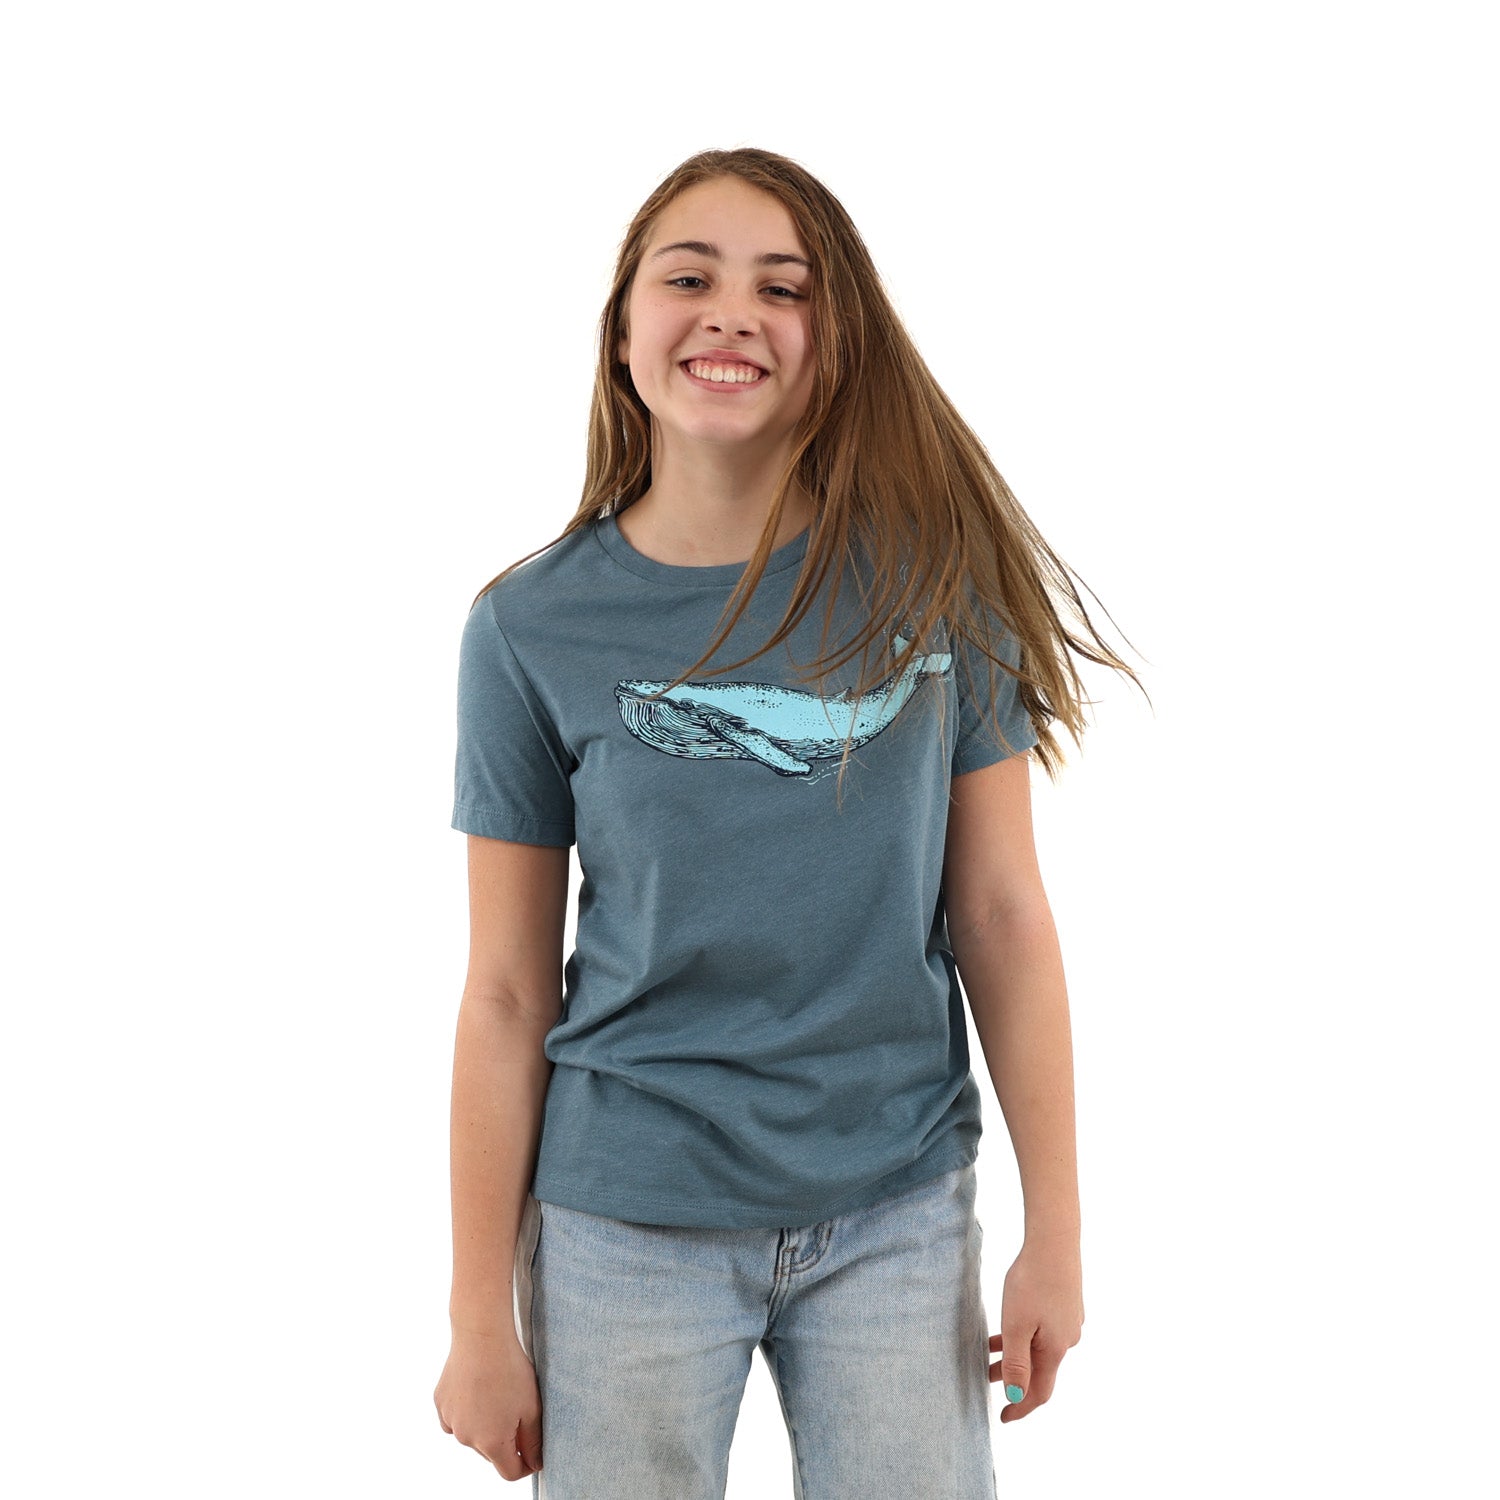 Girl standing with hands in her jean pockets while wearing a blue t shirt with a blue whale screen printed across the chest/boob zone.